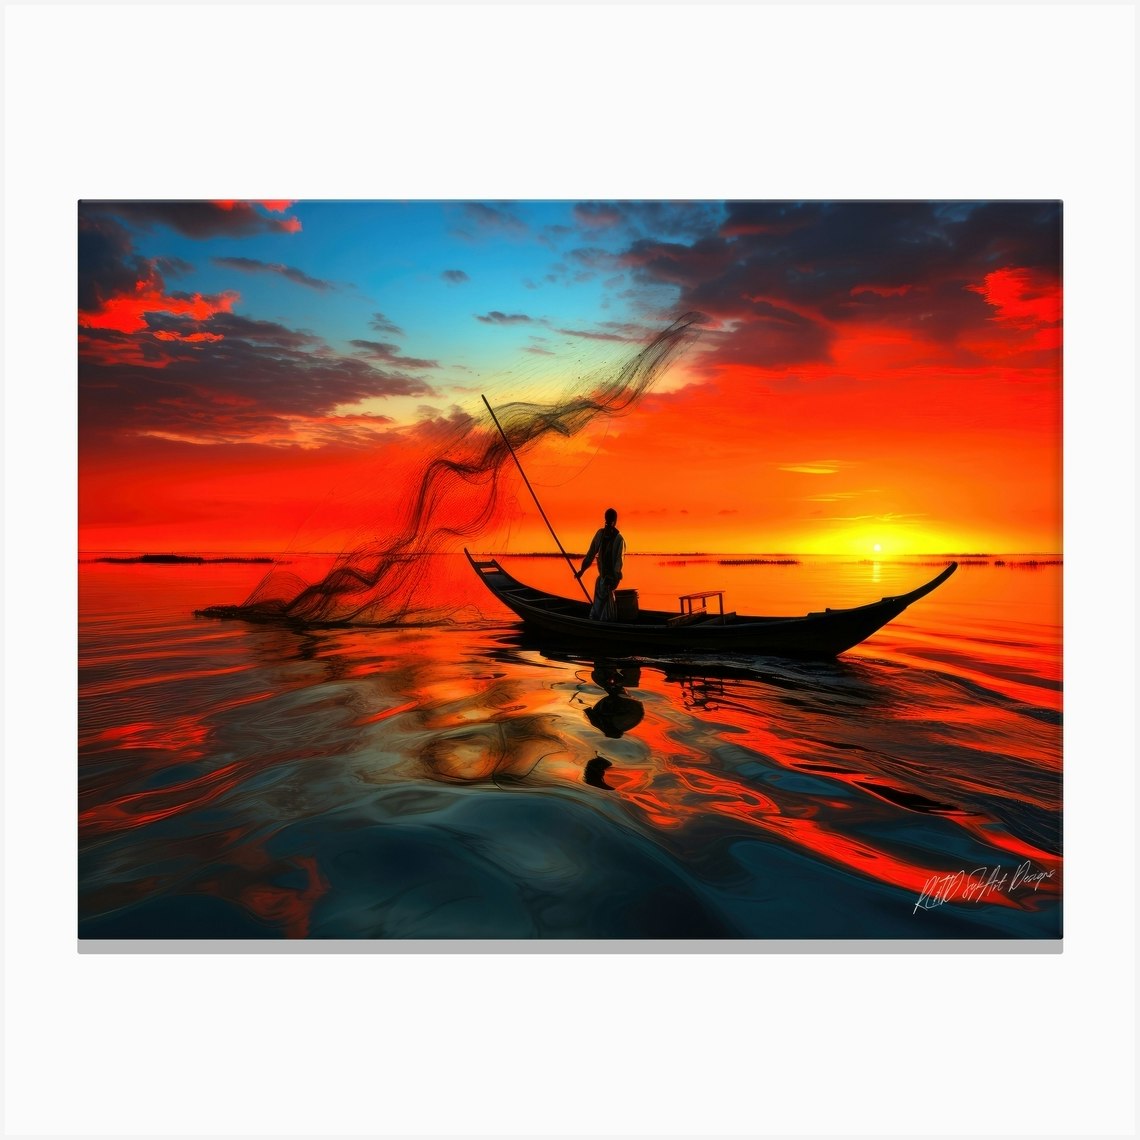 Sunset Light - Fishing At Sunset Canvas Print by SykArt Designs - Fy